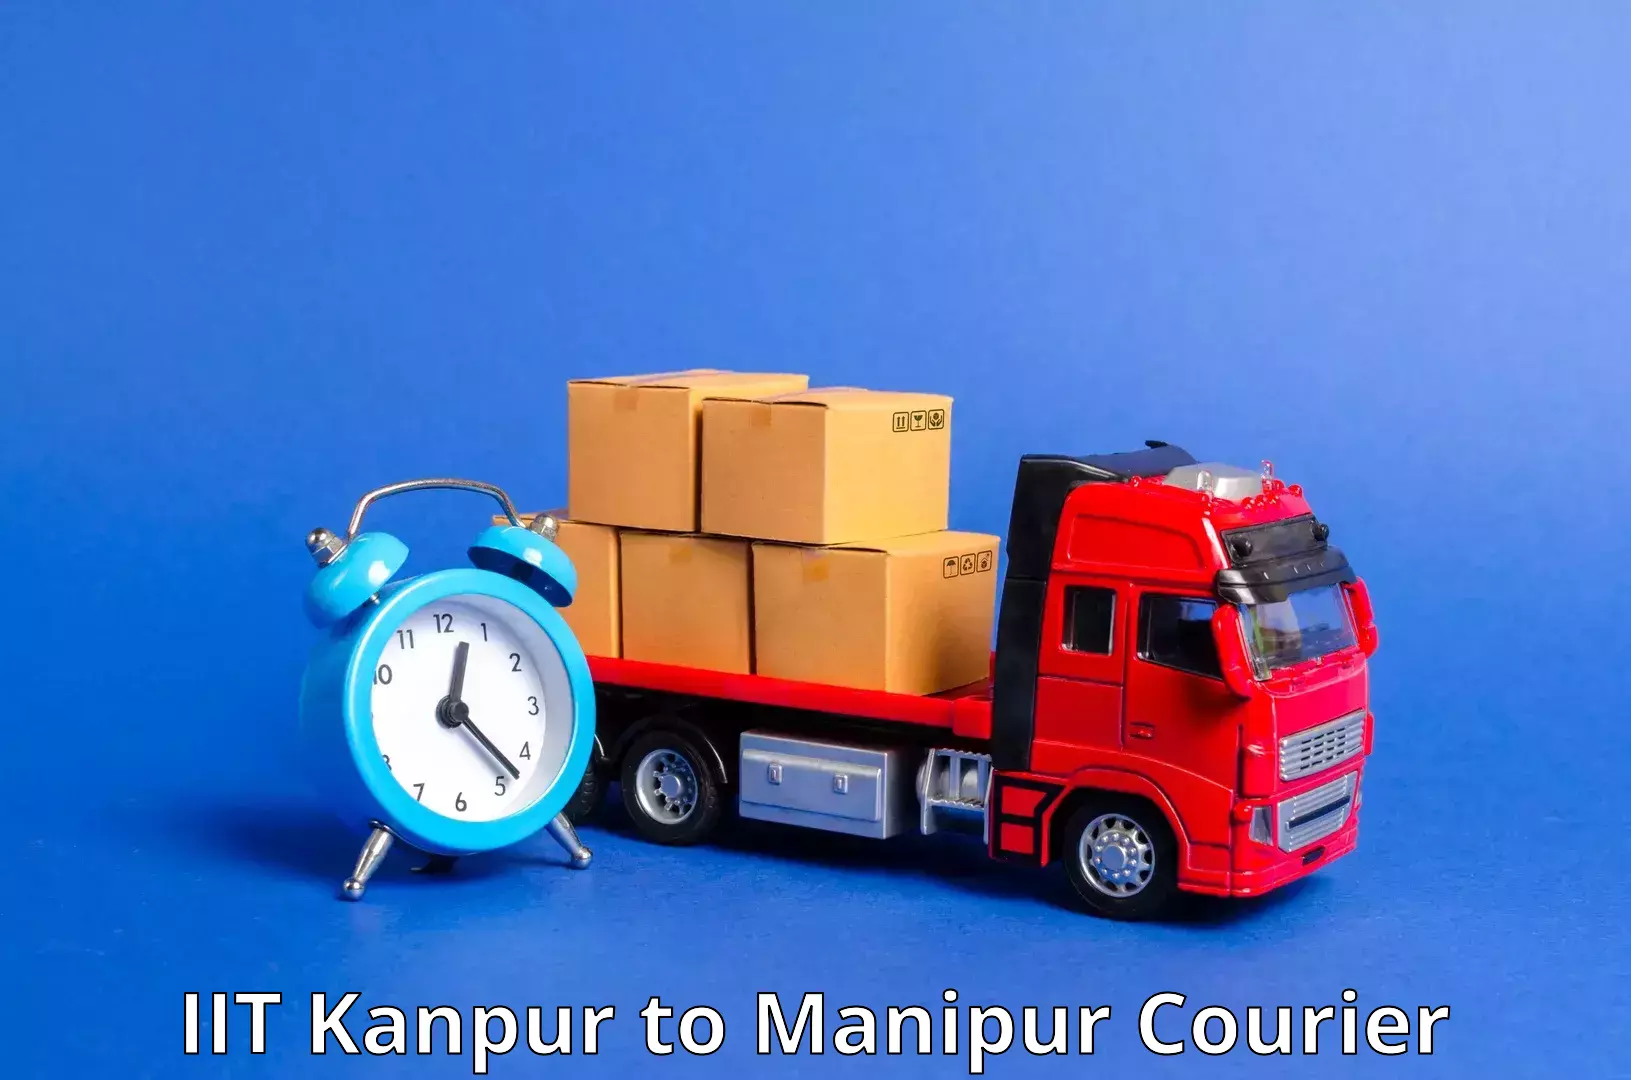 Express delivery network IIT Kanpur to Imphal